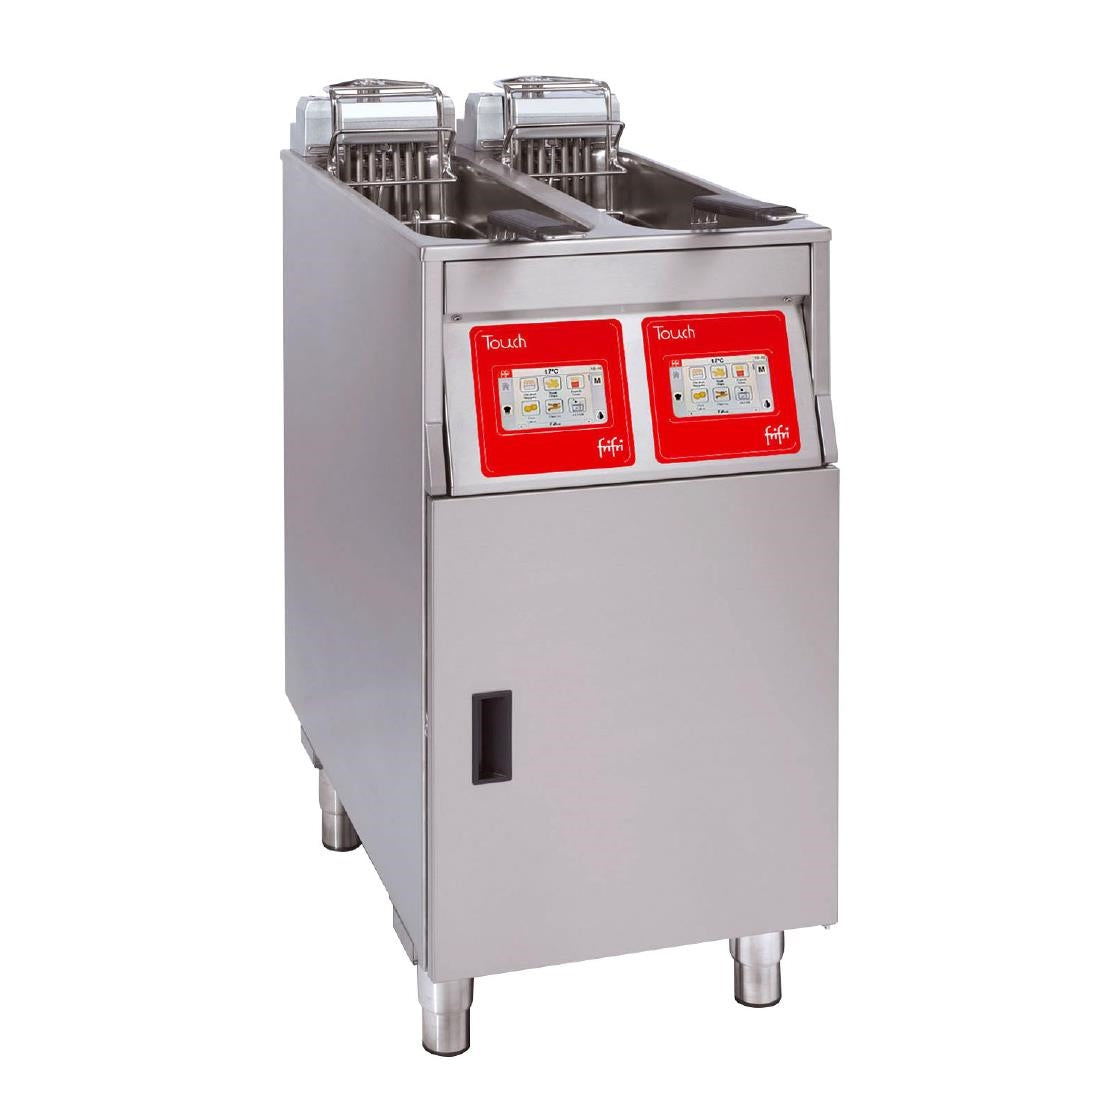 HS011-1PH FriFri Touch 422 Electric Free-Standing Twin Tank Fryer 2 Baskets 2x 7.5kW - Single Phase